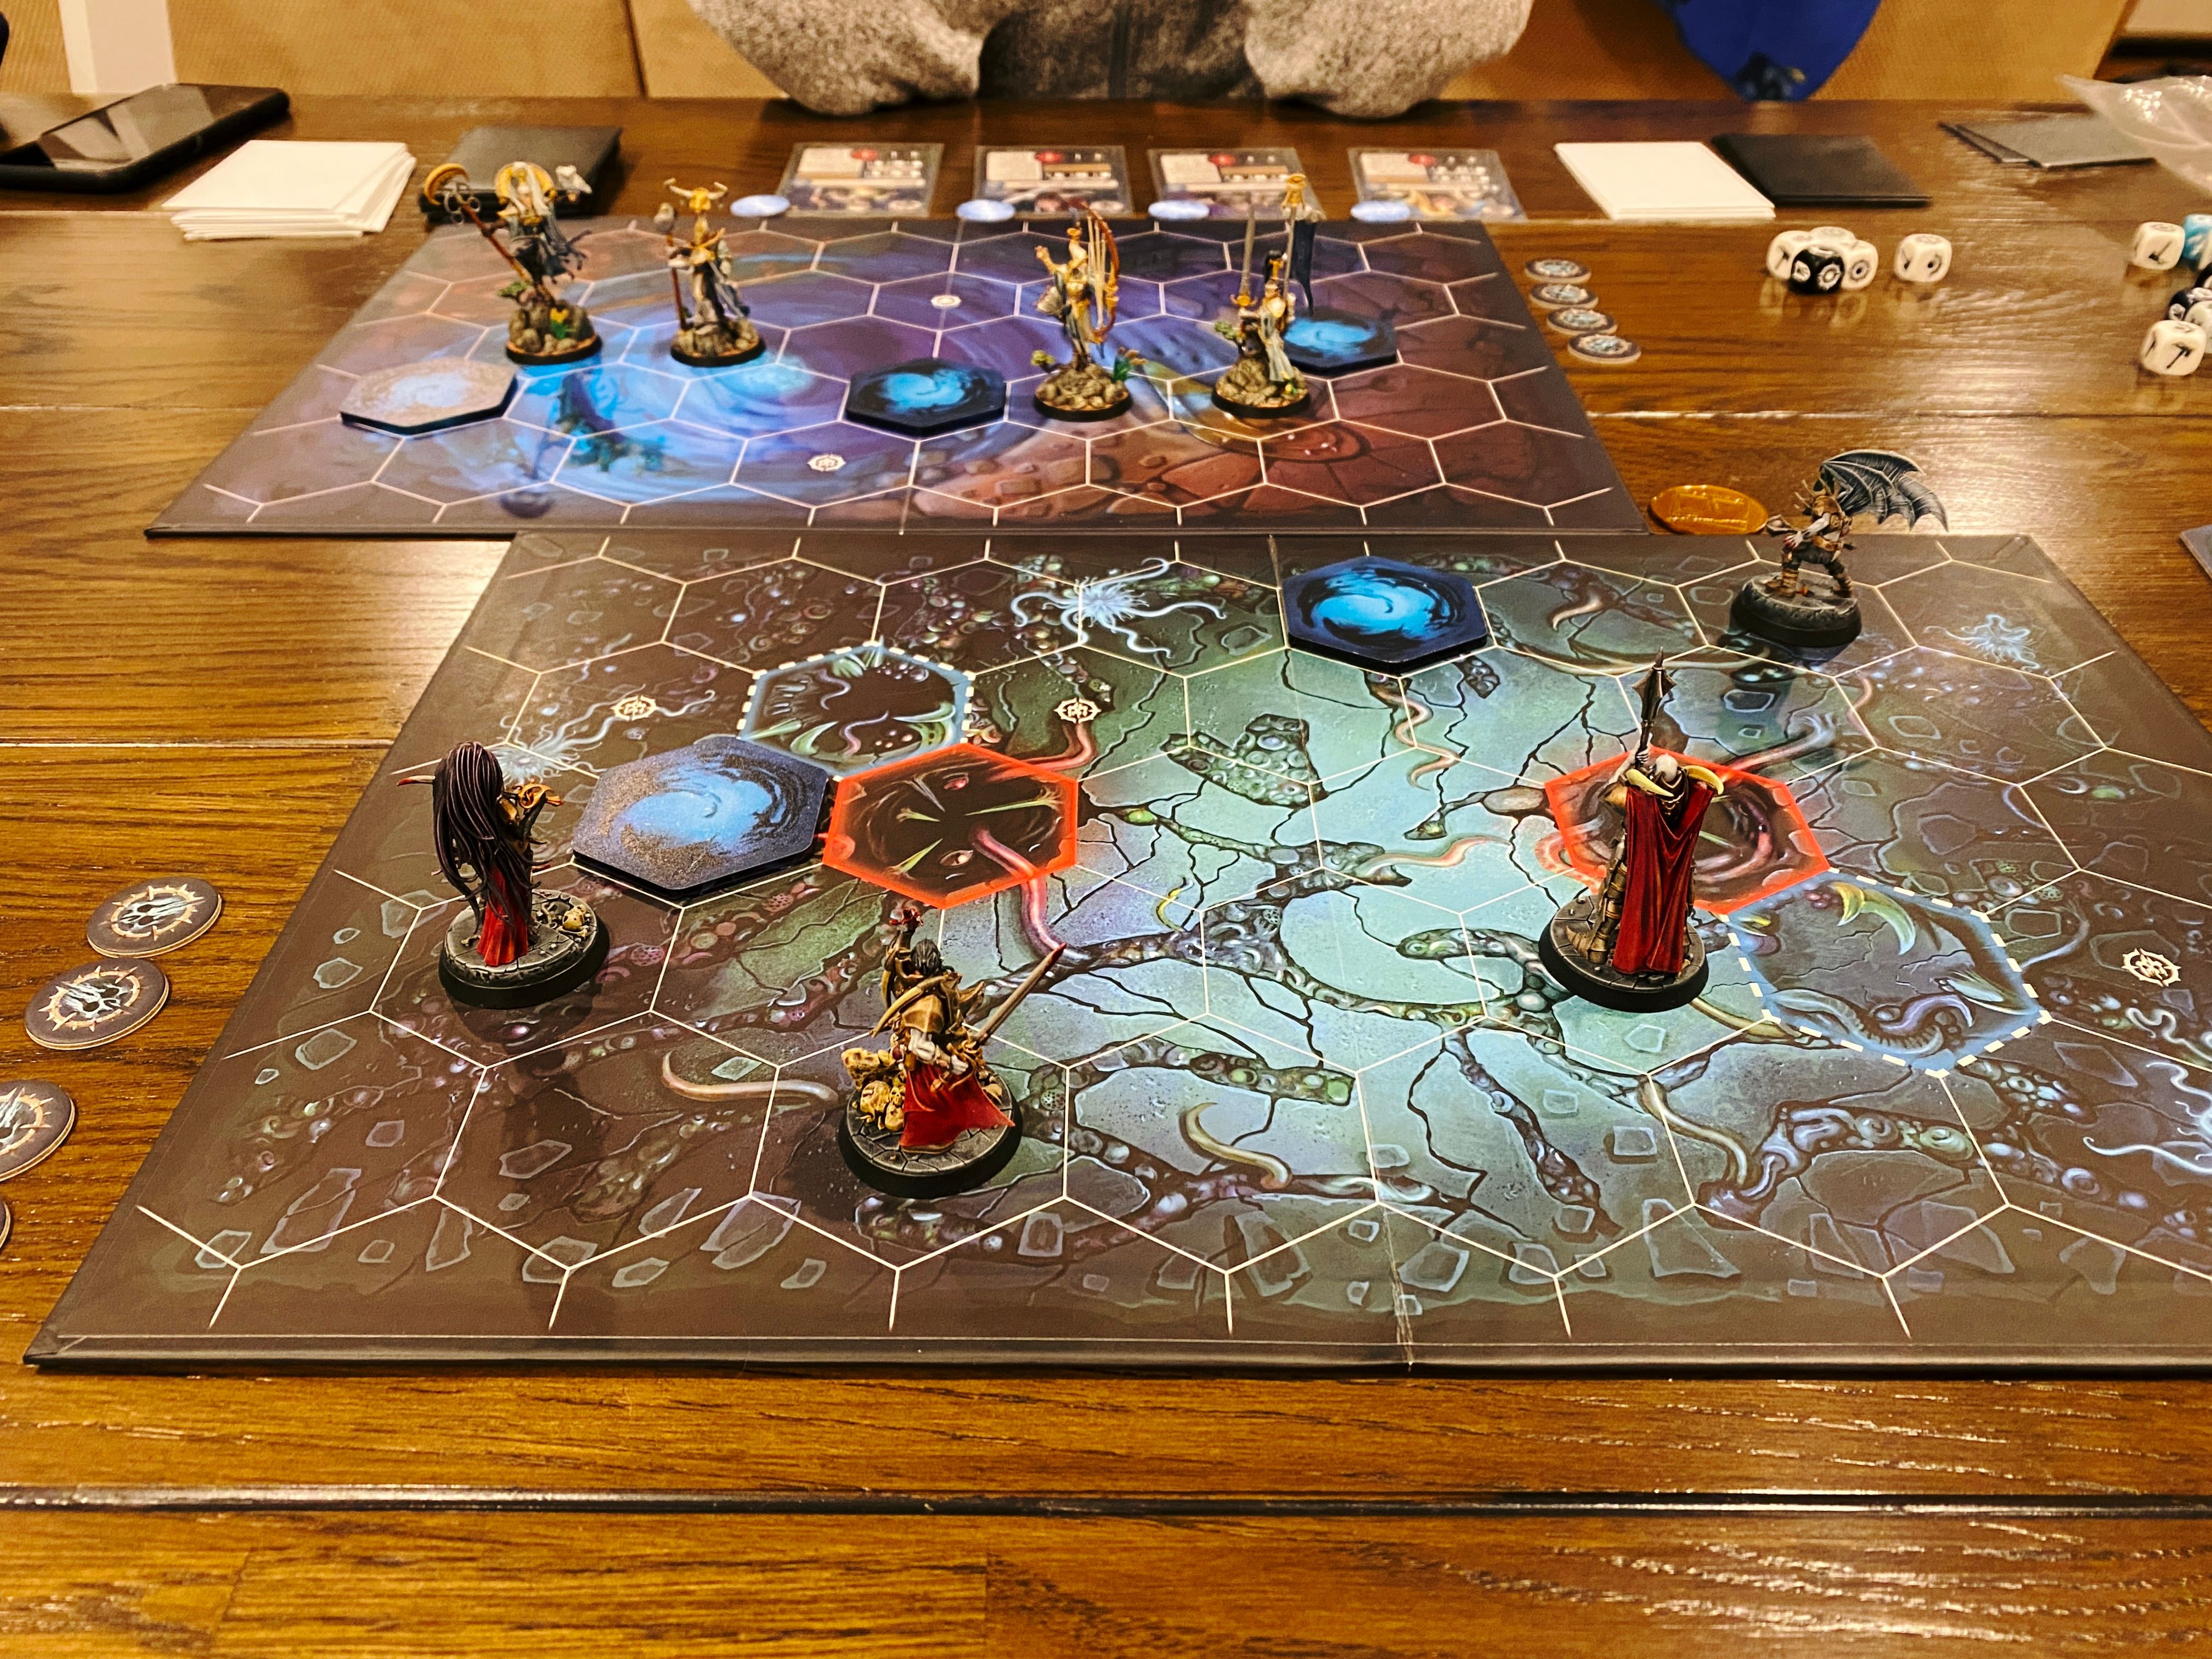 A photo of the initial setup of a game of Warhammer Underworlds. It's a miniatures board game played on boards with hexagonal tiles, closest to the camera are four armoured vampires with pale blue skin and red cloaks, with blood dripping from their weapons and the corners of their mouths, and on the other side are four lithe and lightly-armoured elves.